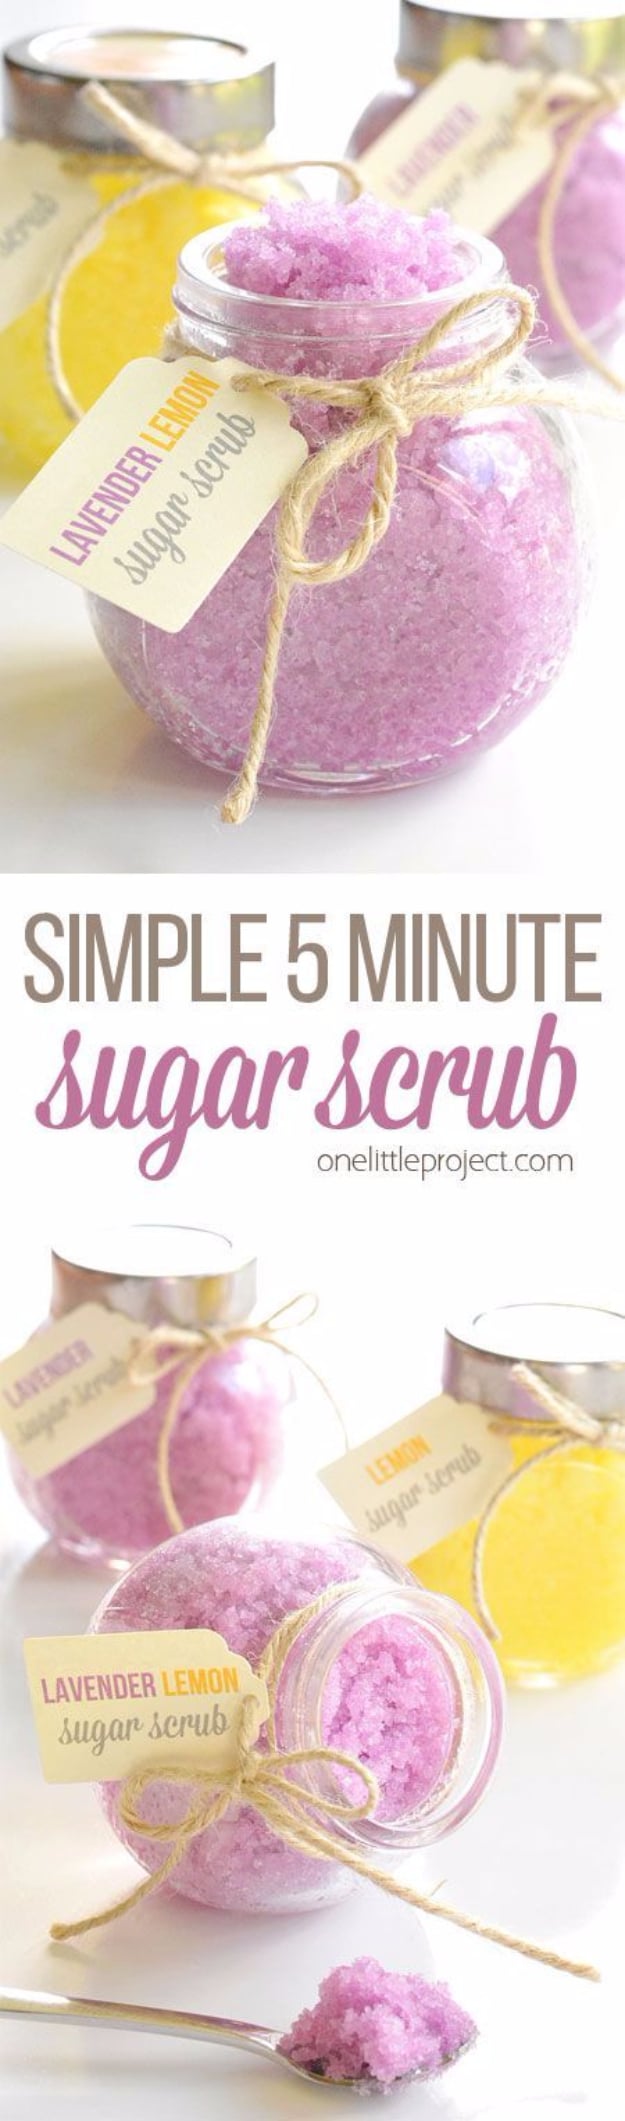 DIY Sugar Scrub Recipes - Homemade Sugar Scrub - Easy and Quick Beauty Products You Can Make at Home - Cool and Cheap DIY Gift Ideas for Homemade Presents Women, Girls and Teens Love - Natural Recipe Ideas for Making Sugar Scrub With Step by Step Tutorials 